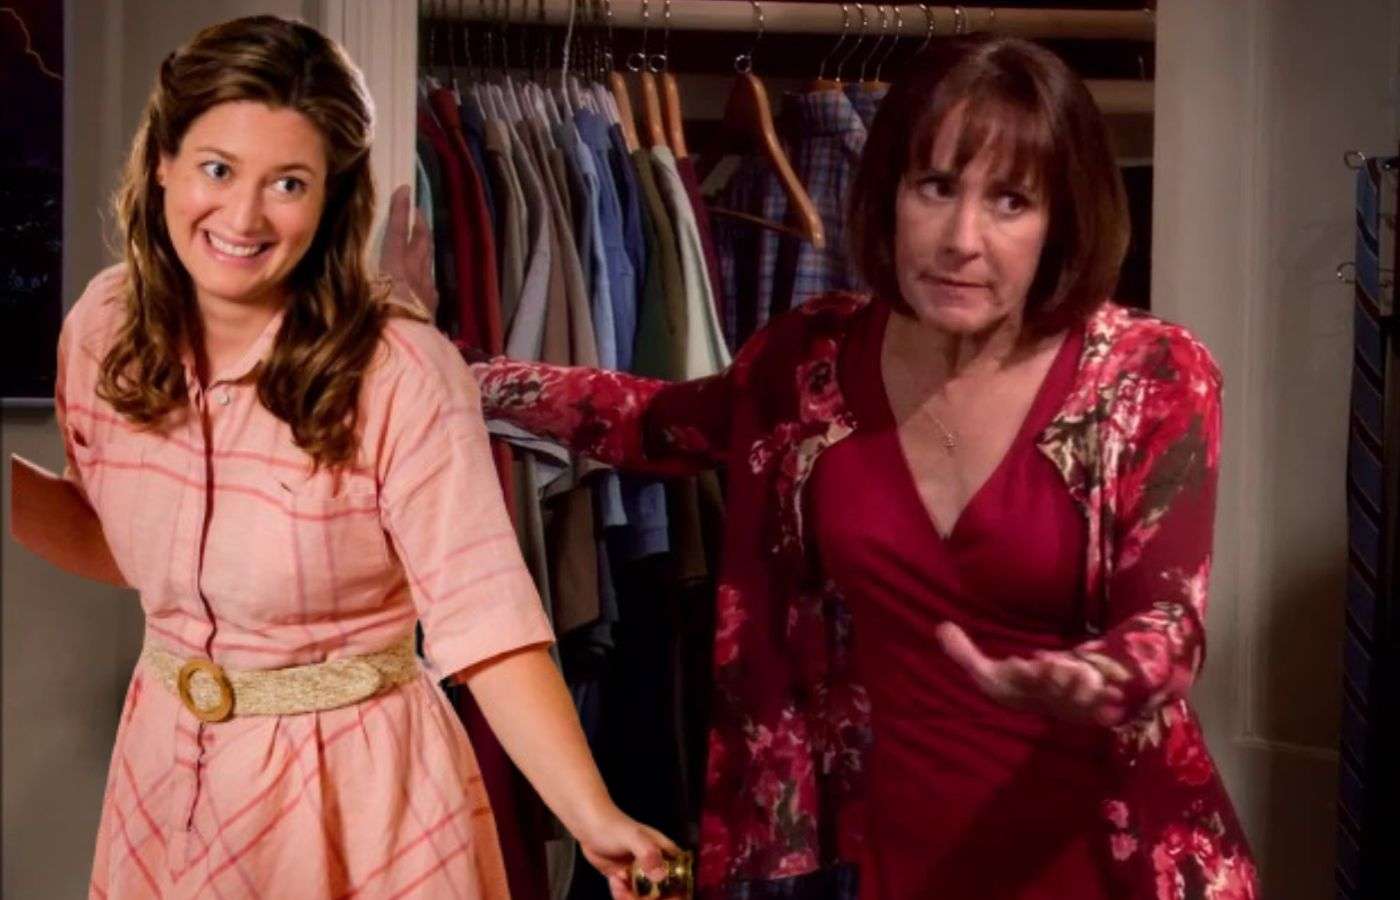 Zoe Perry and Laurie Metcalf as Mary Cooper in Young Sheldon and The Big Bang Theory.